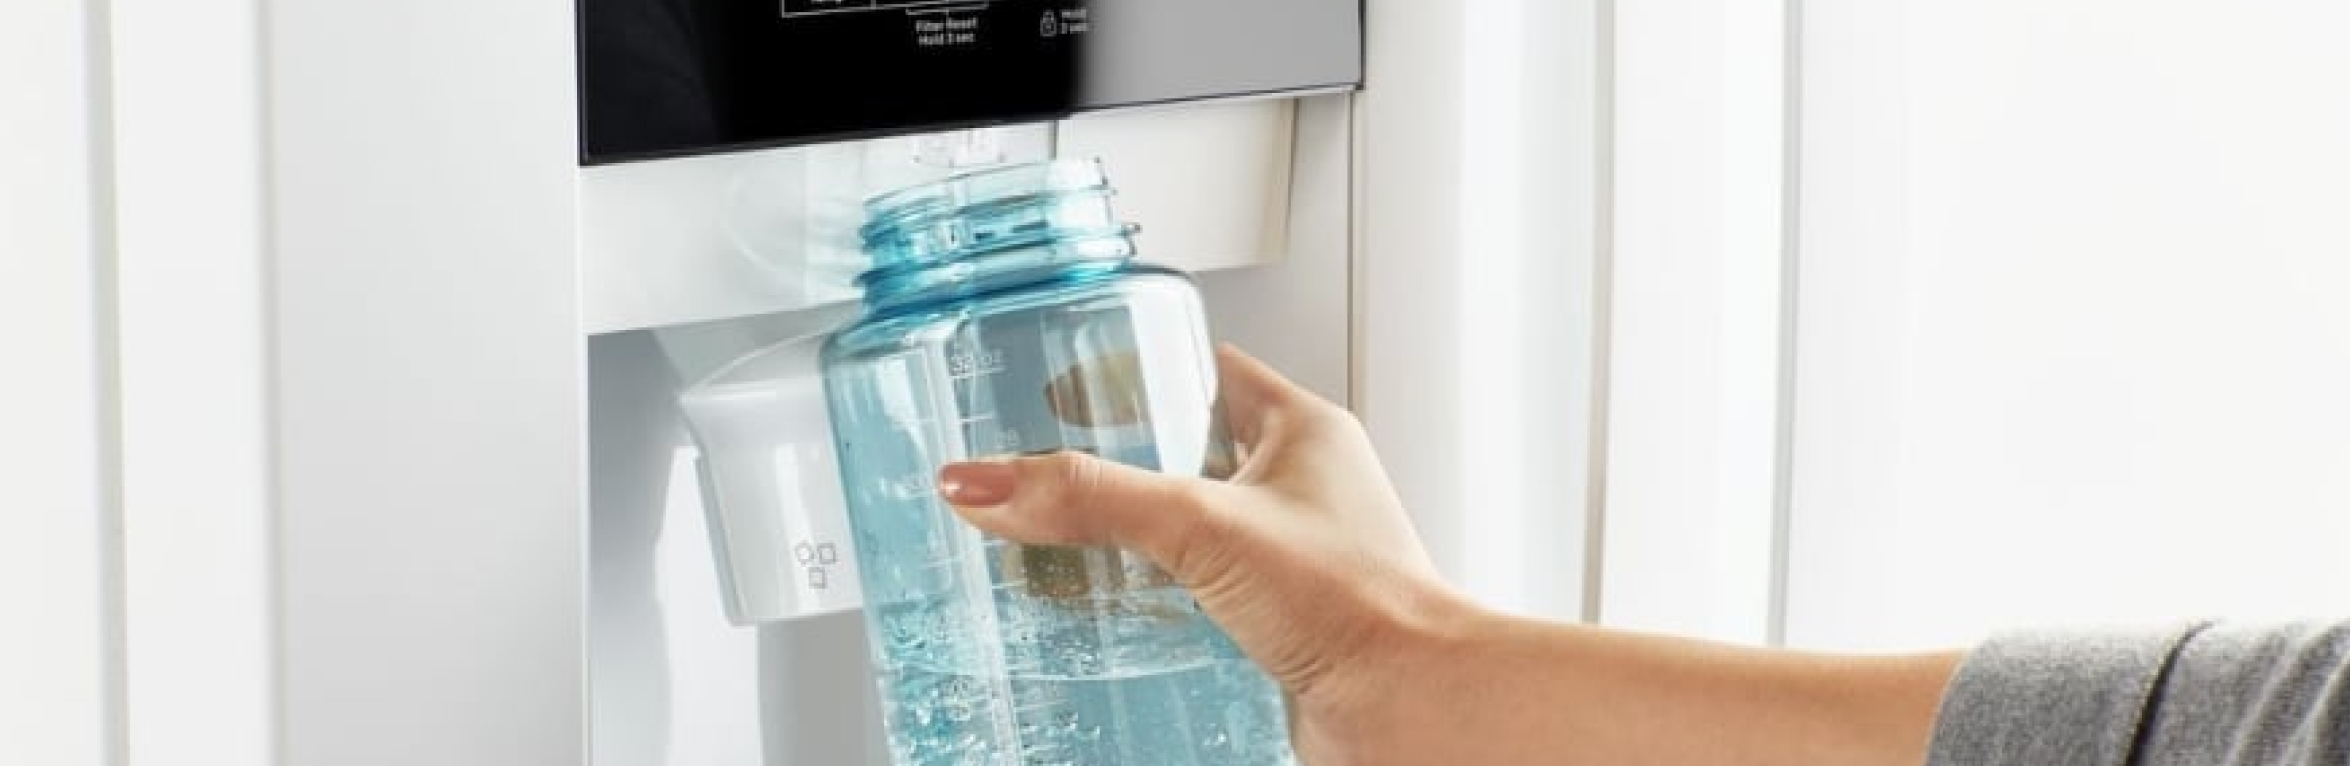 ClearChoice Refrigerator Water Filters